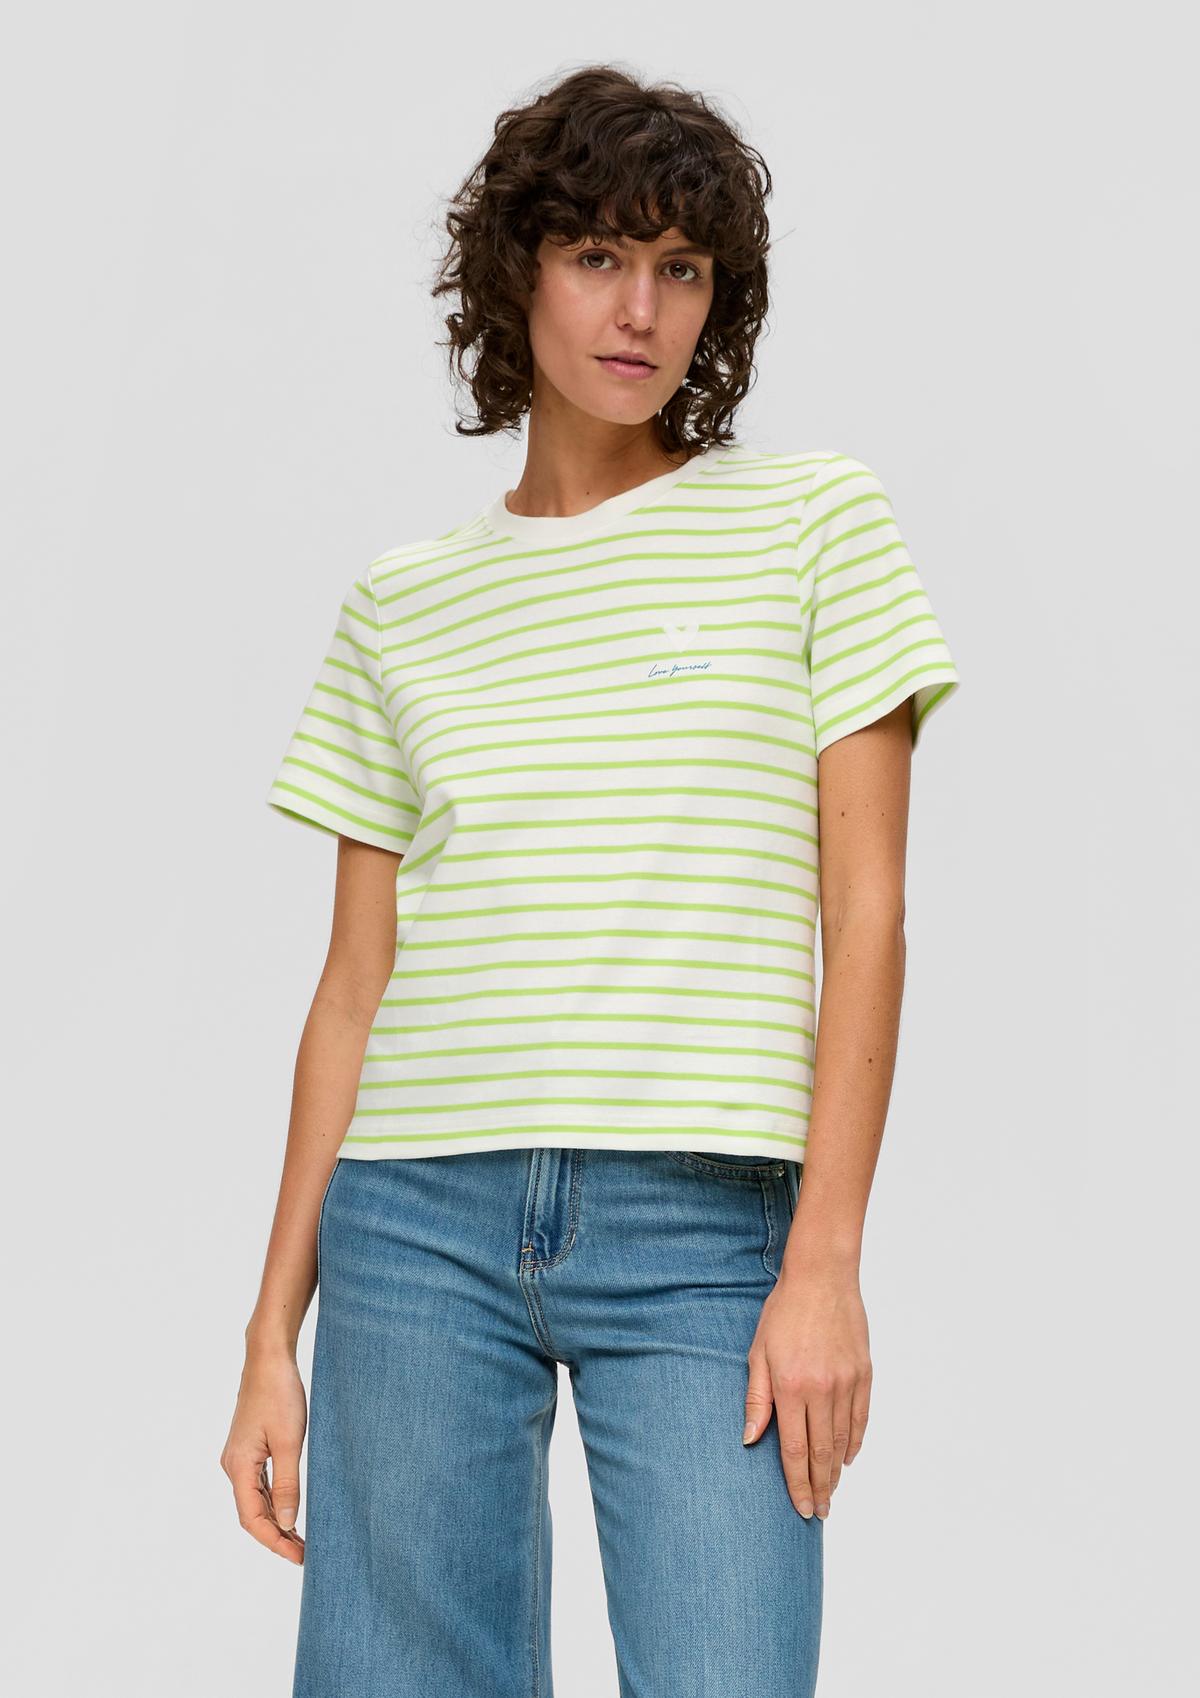 T-shirt with a stripe pattern